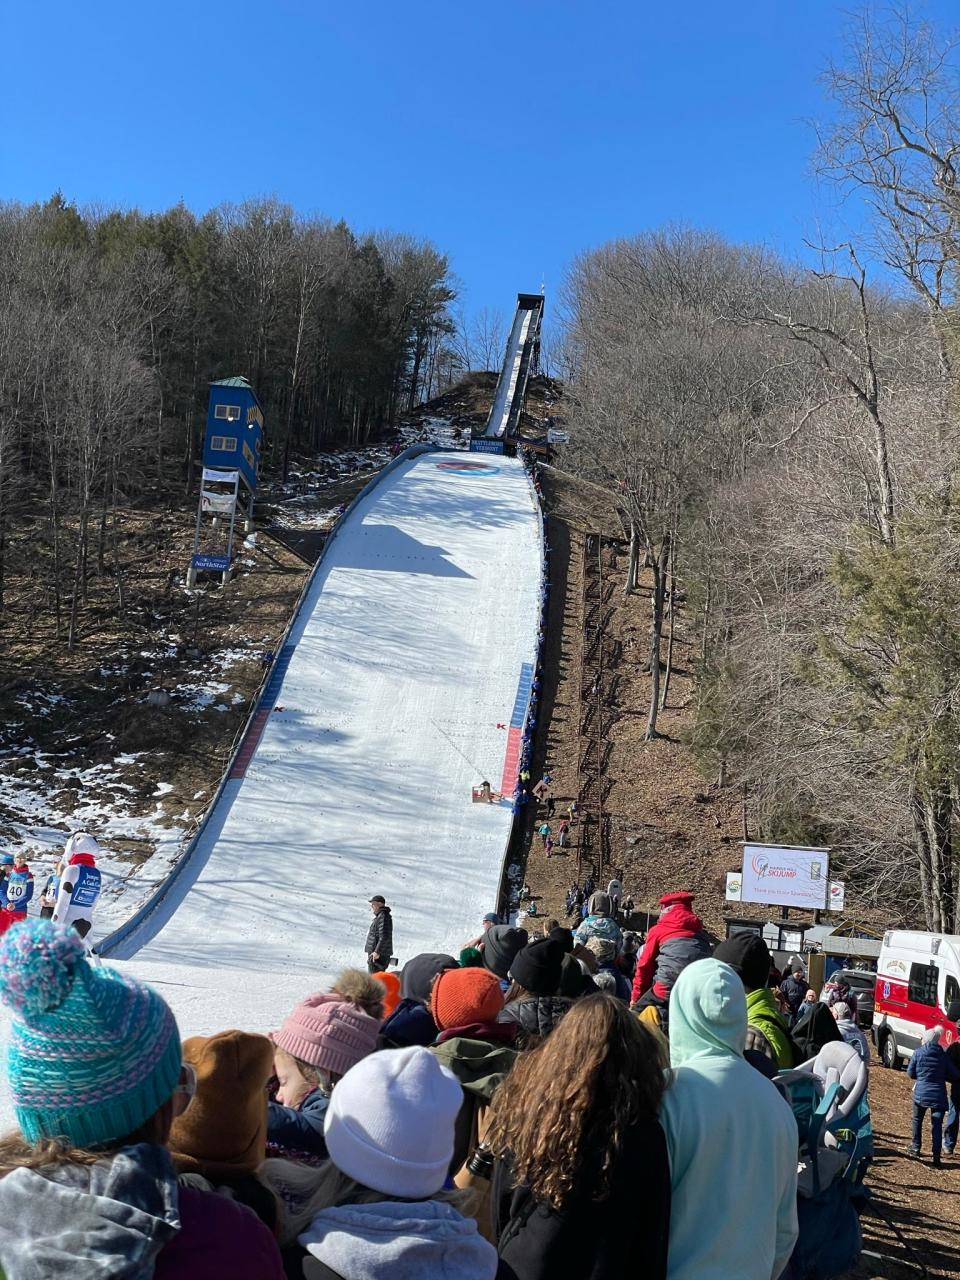 Fans watch the annual weekend Nordic ski jumping event at Brattleboro, Vermont's Harris Hill.